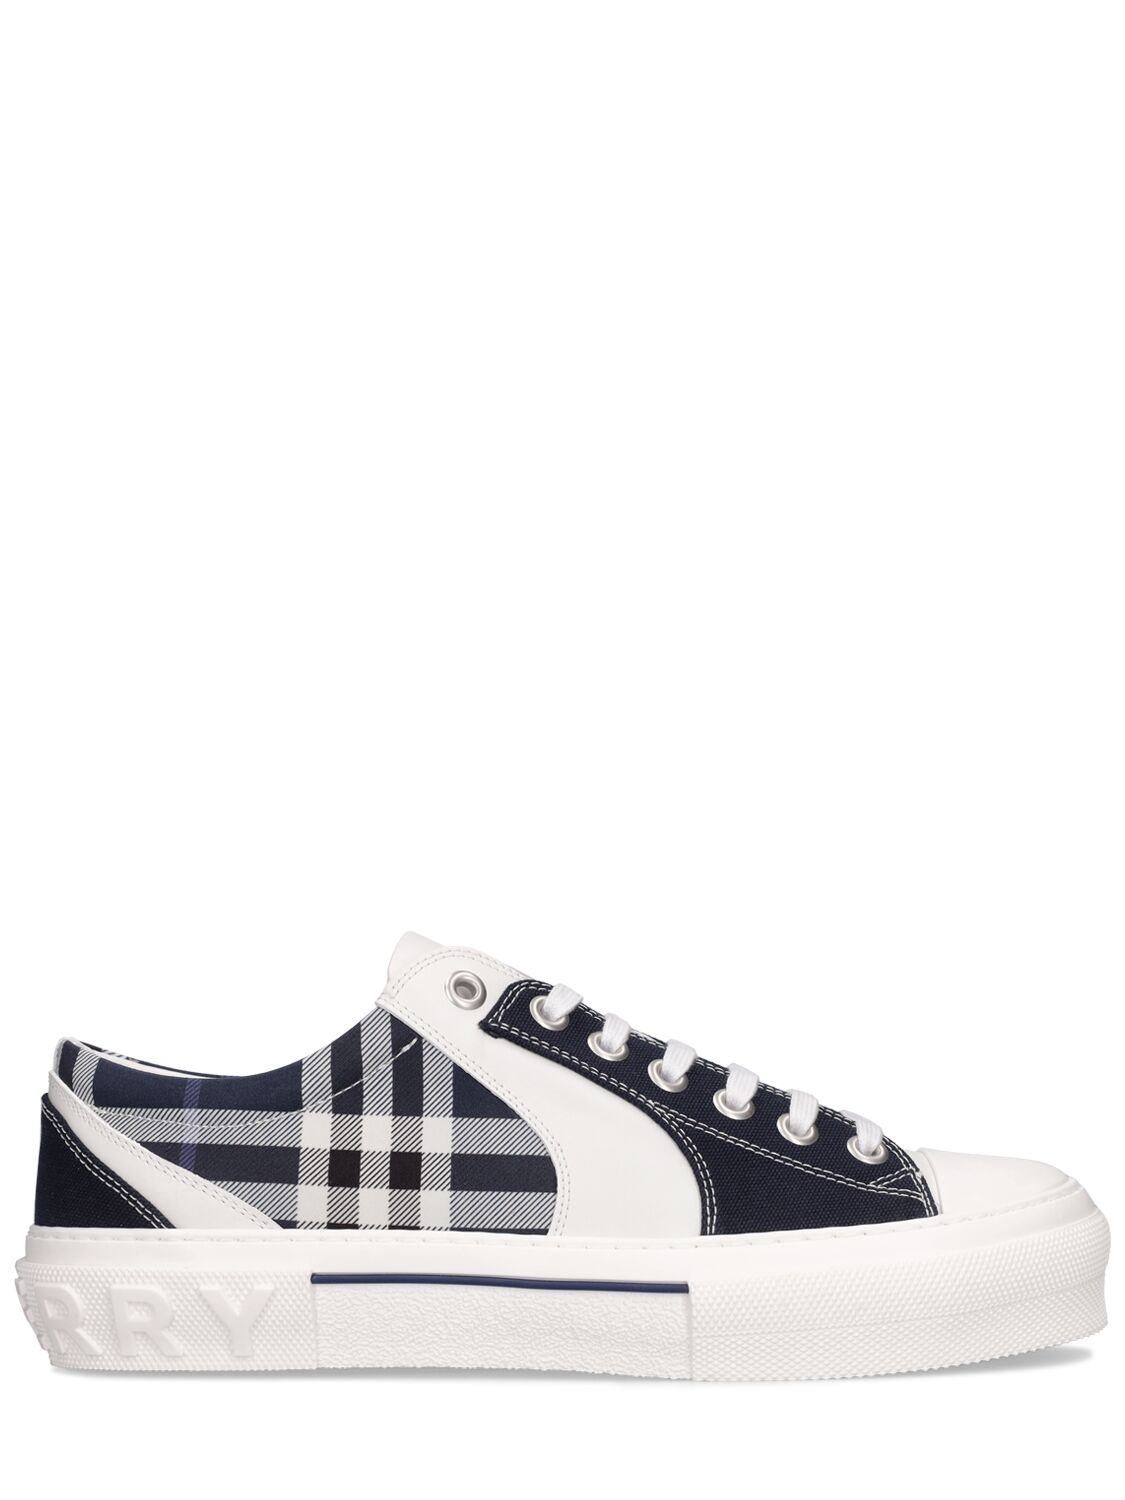 Burberry Vintage Check Low-top Sneakers In White